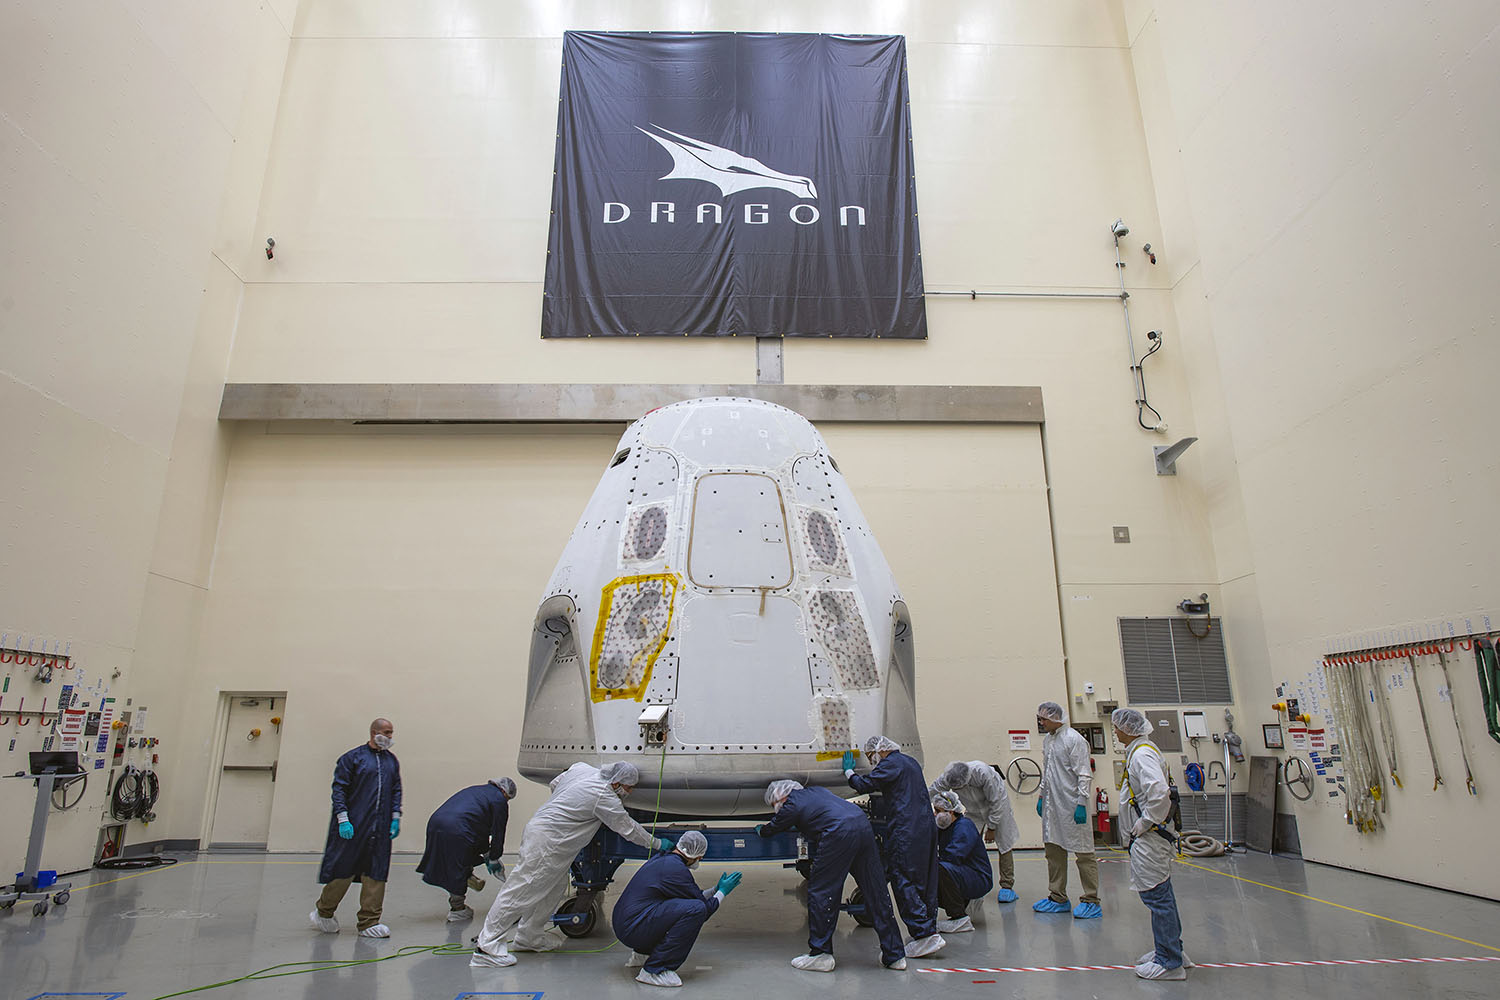 The SpaceX Crew Dragon spacecraft for Demo-2 arrived at the launch site on Feb. 13, 2020.